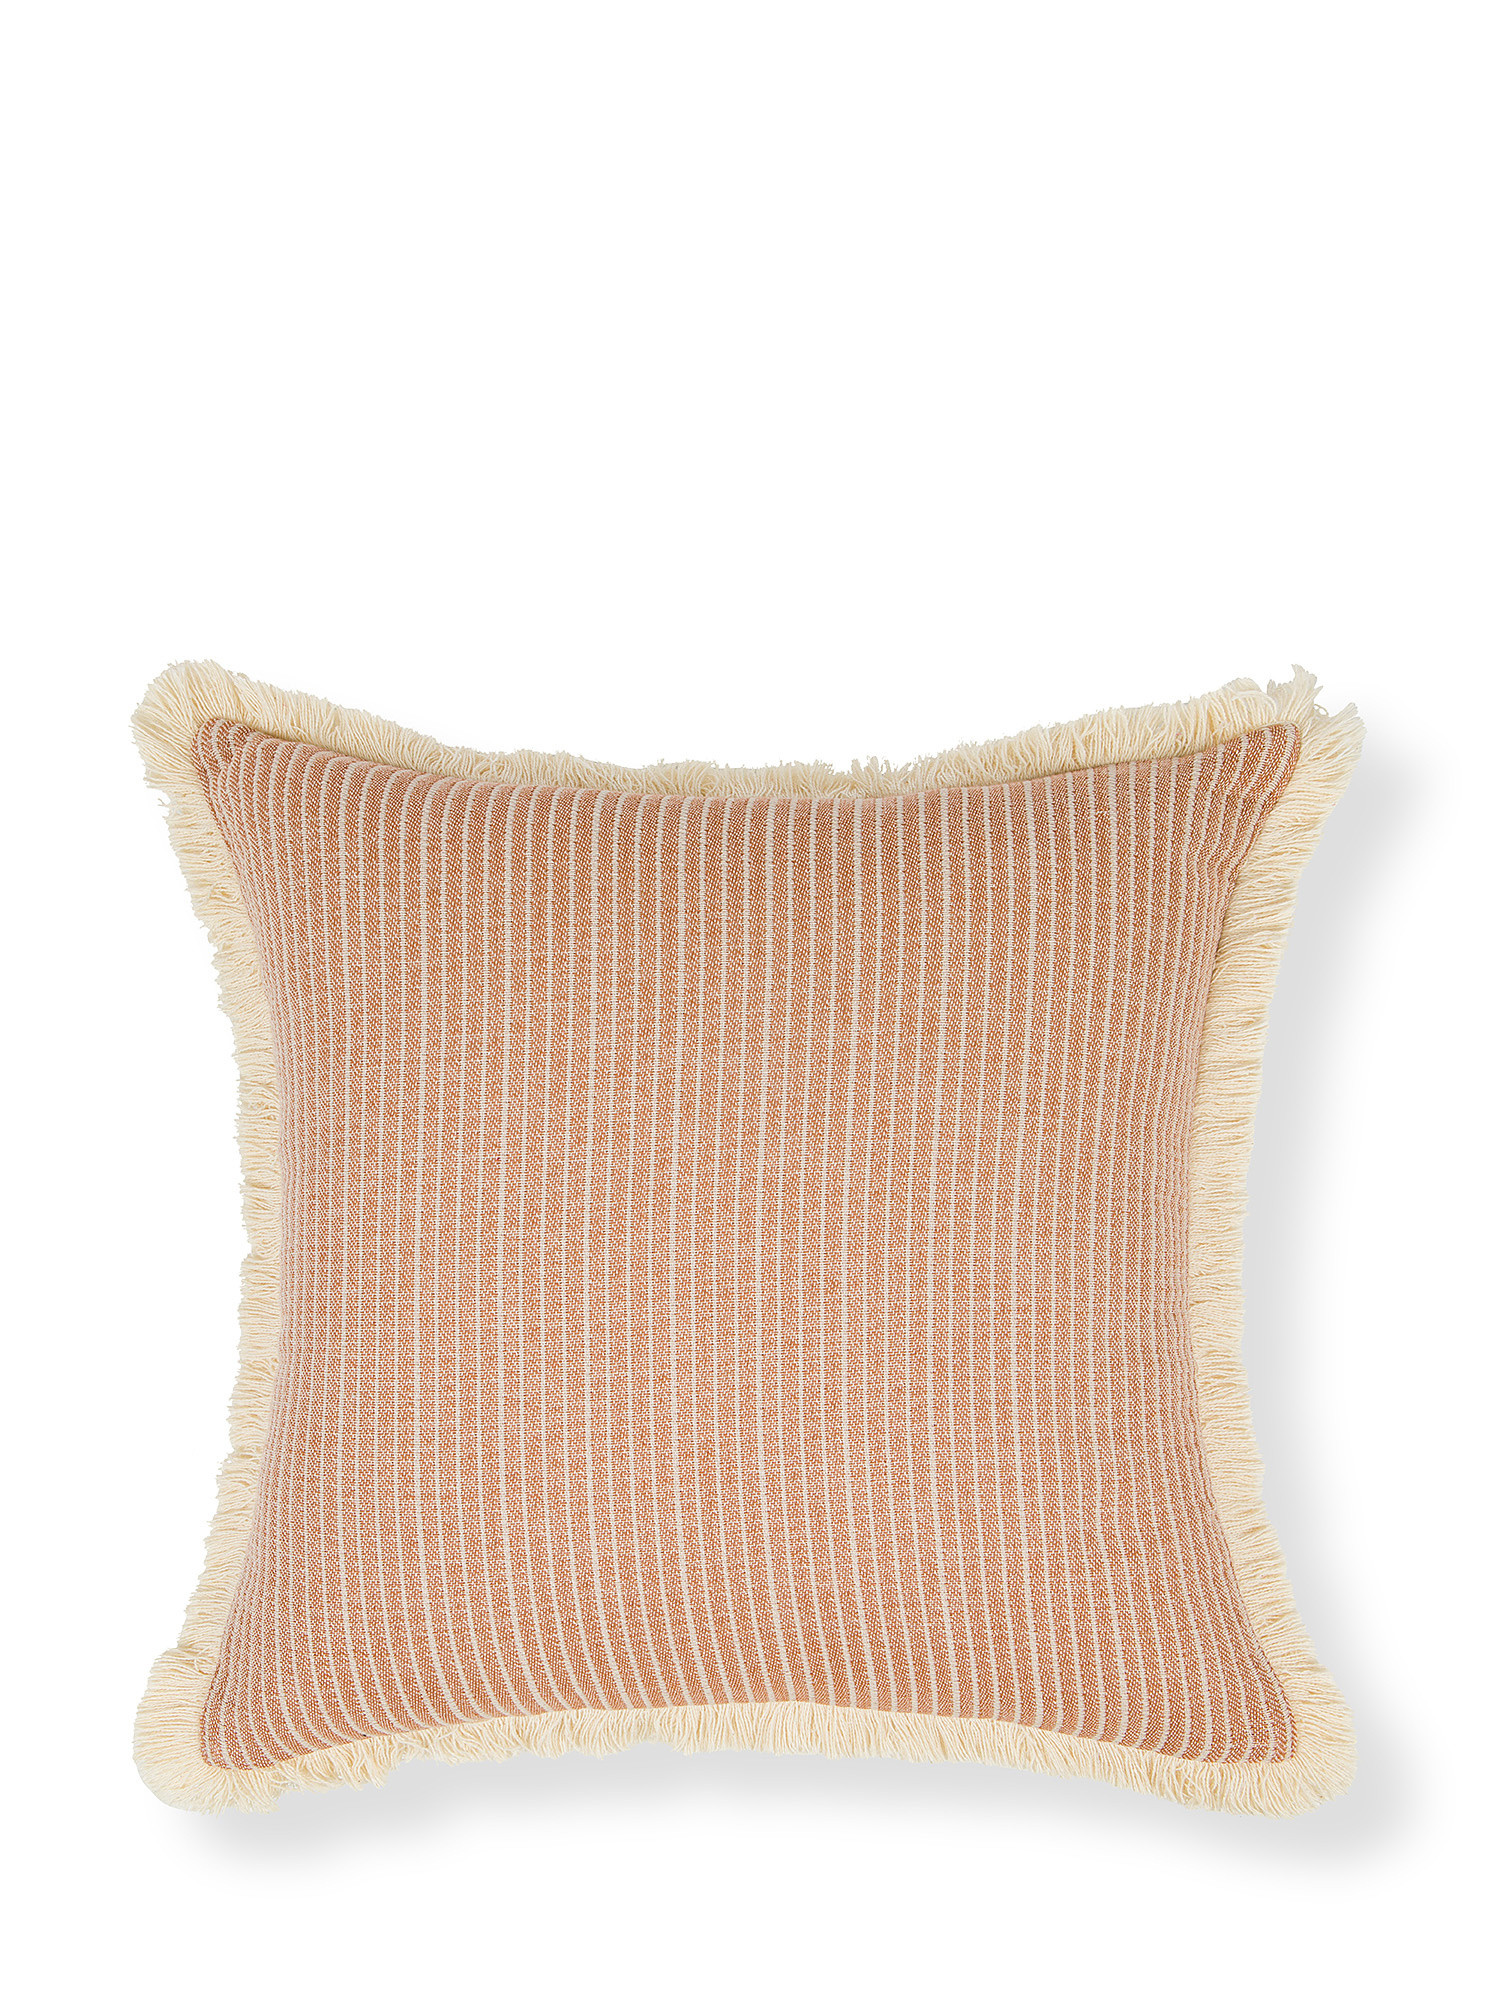 Cushion 45x45 cm striped pattern with fringes, Beige, large image number 0